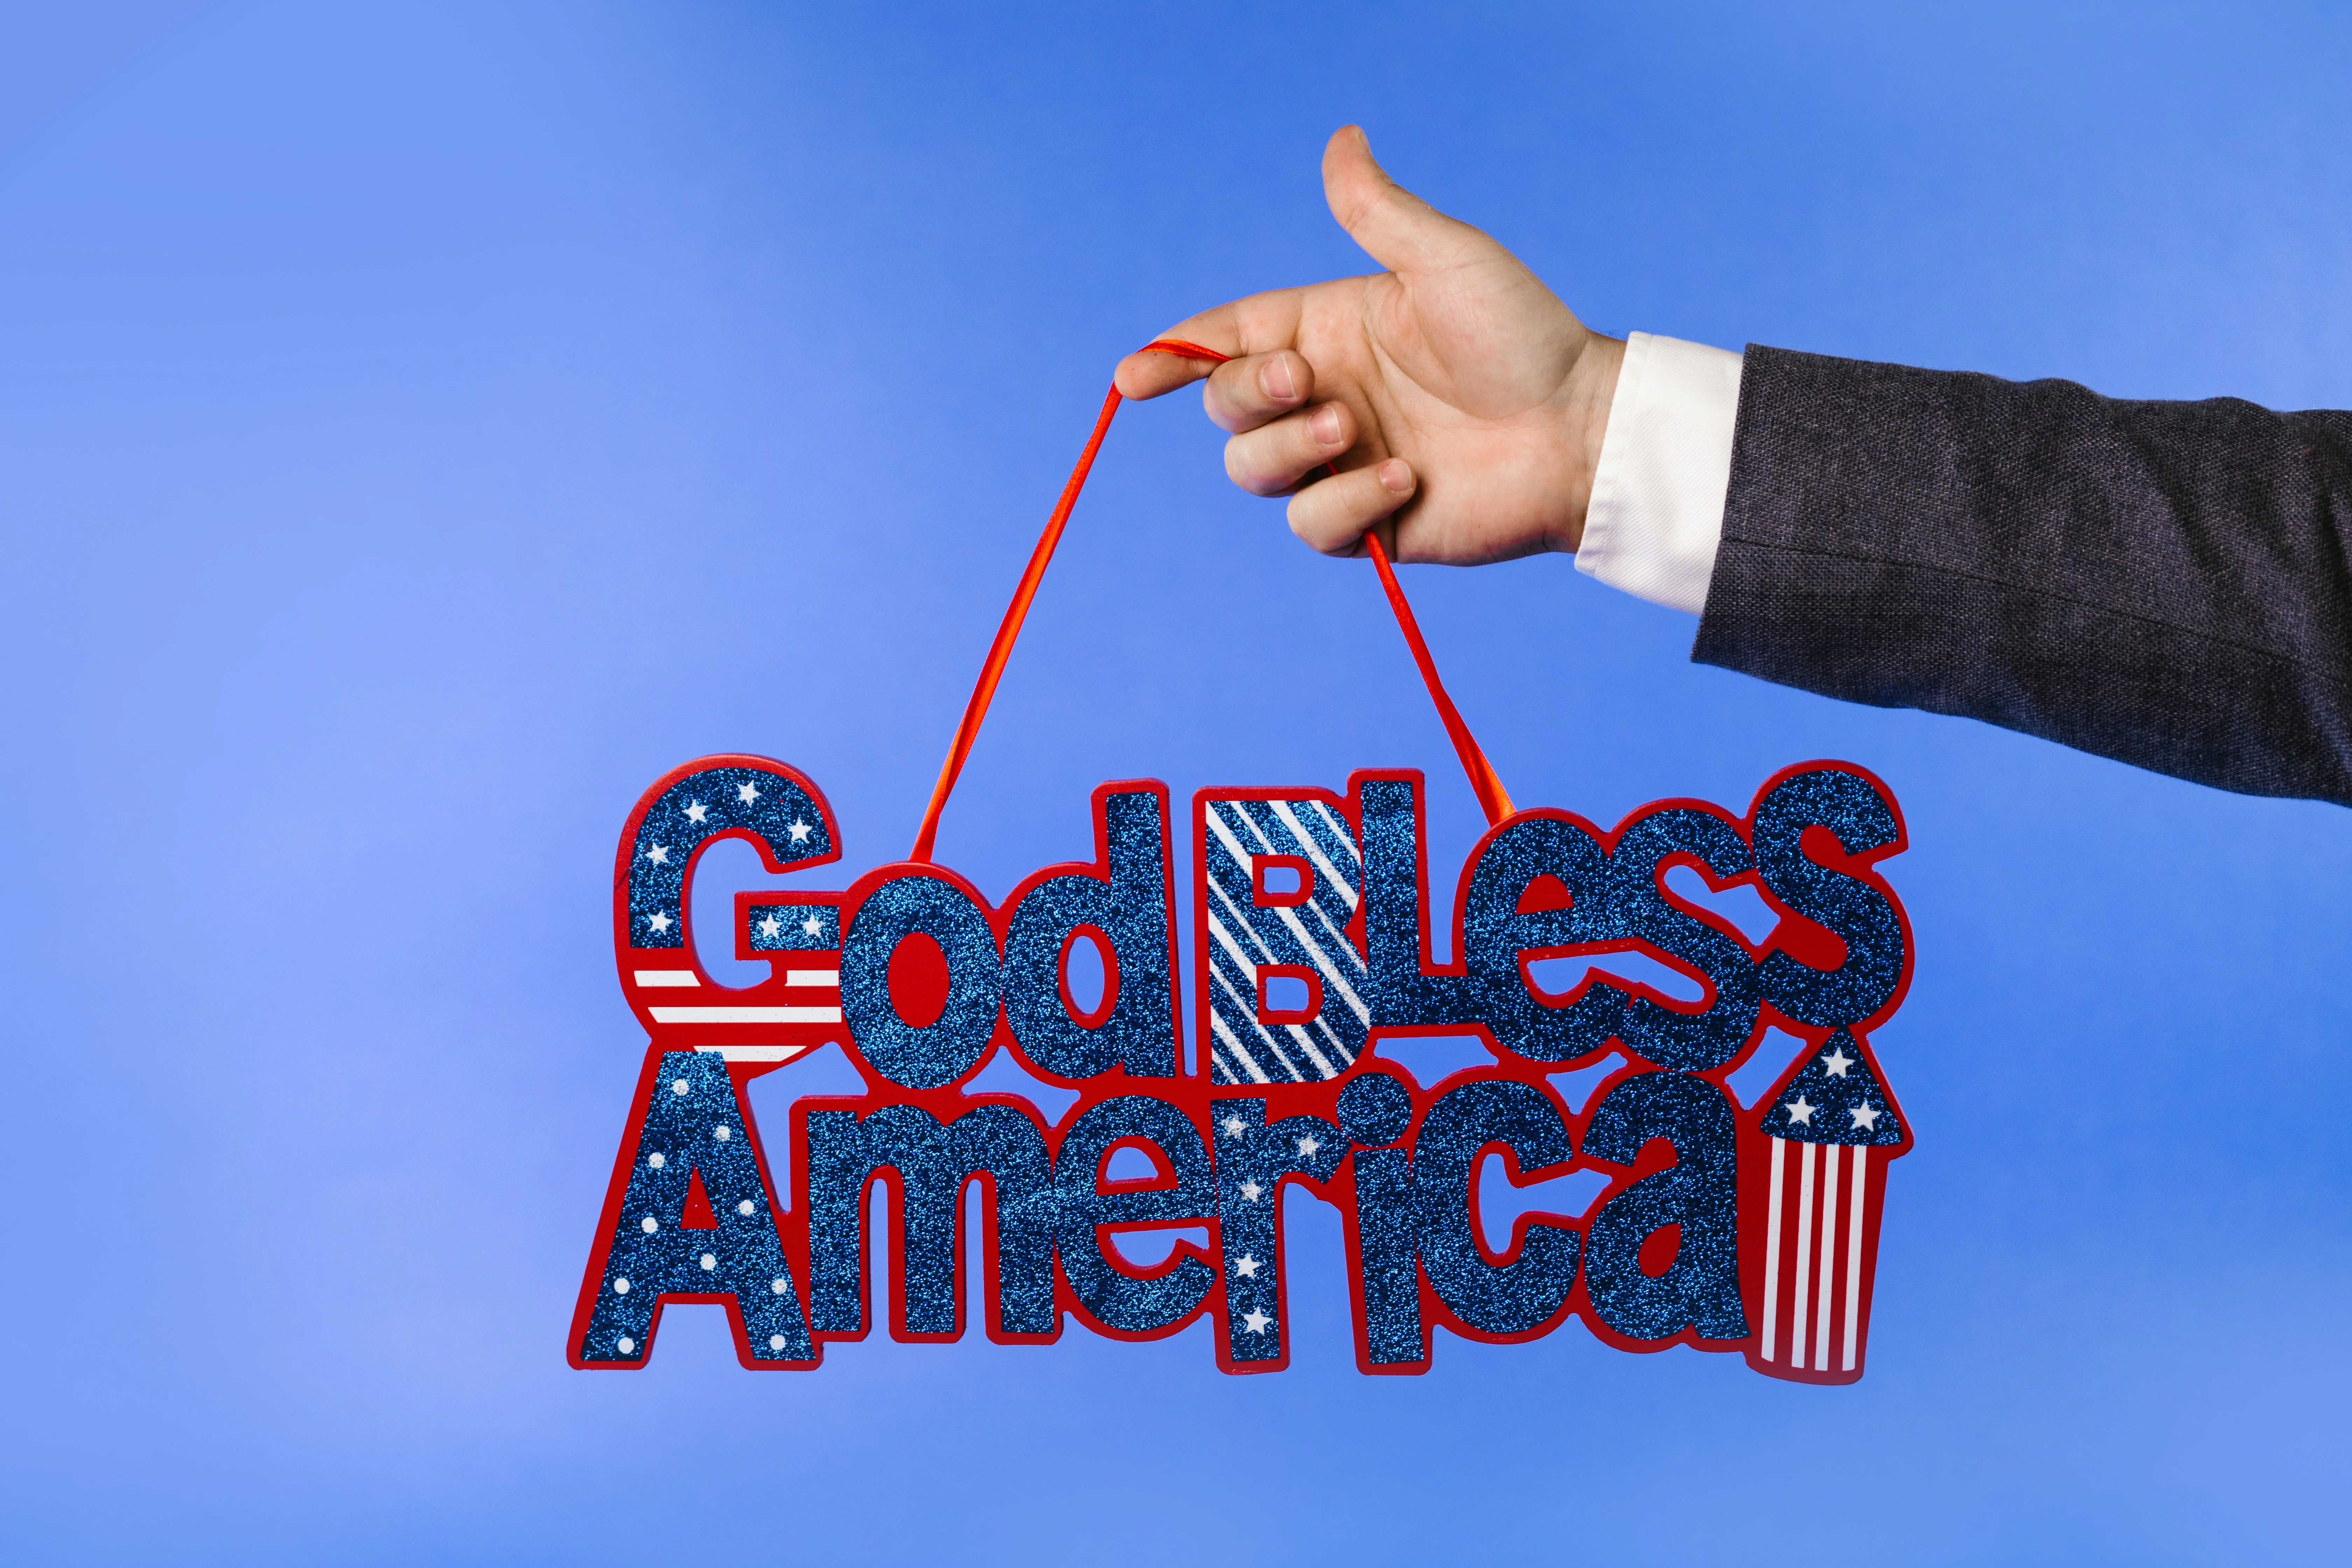 A Complete Guide to Finding and Purchasing American Products